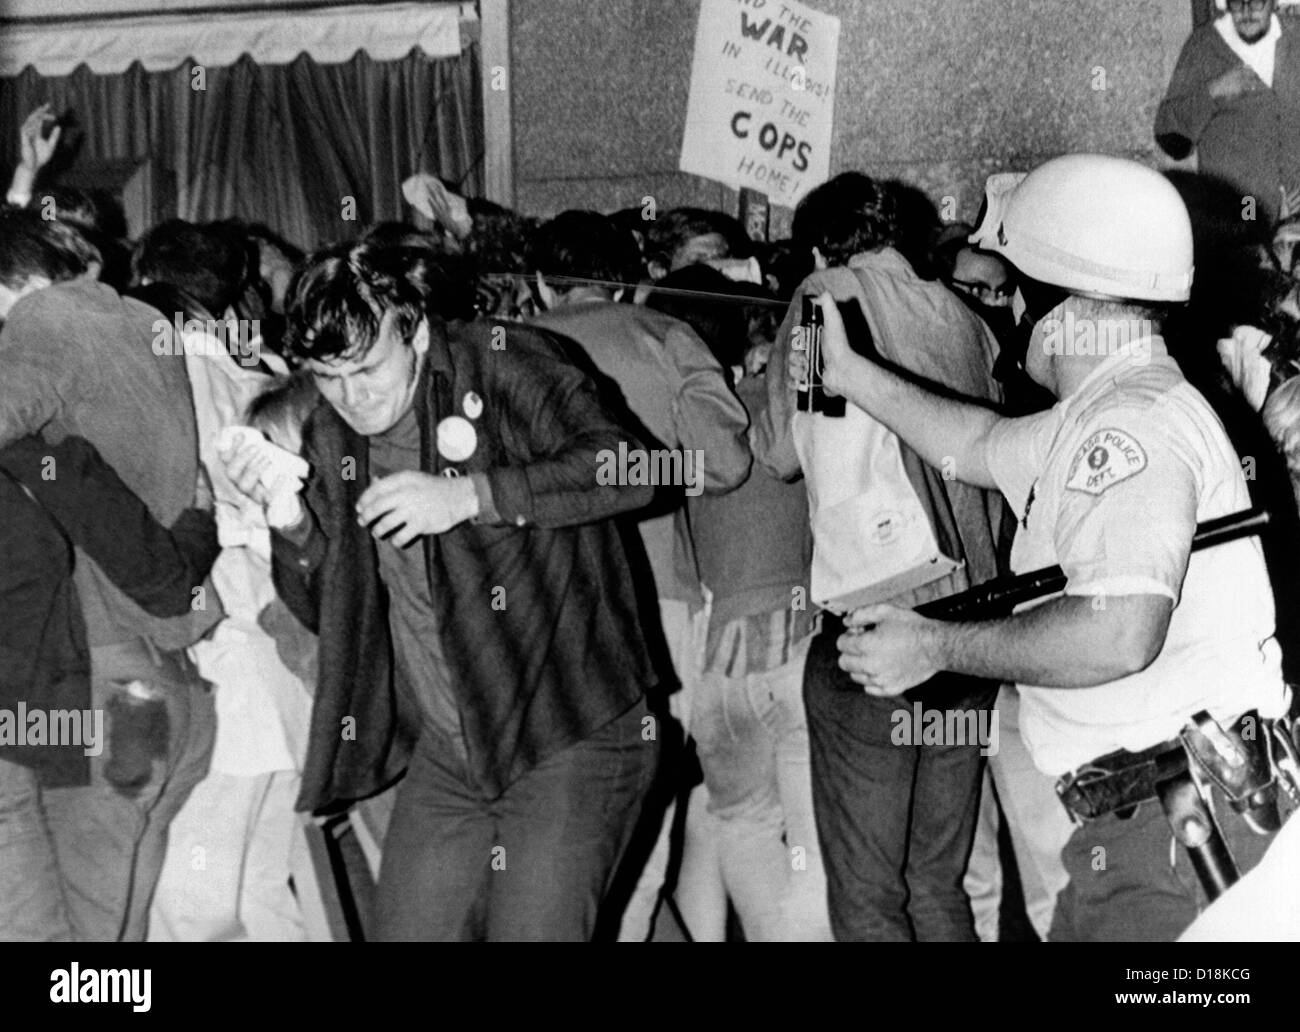 Chicago Police officer (right) uses pressure can to squirts mace at anti-Vietnam War demonstrators. The protest was outside the Stock Photo